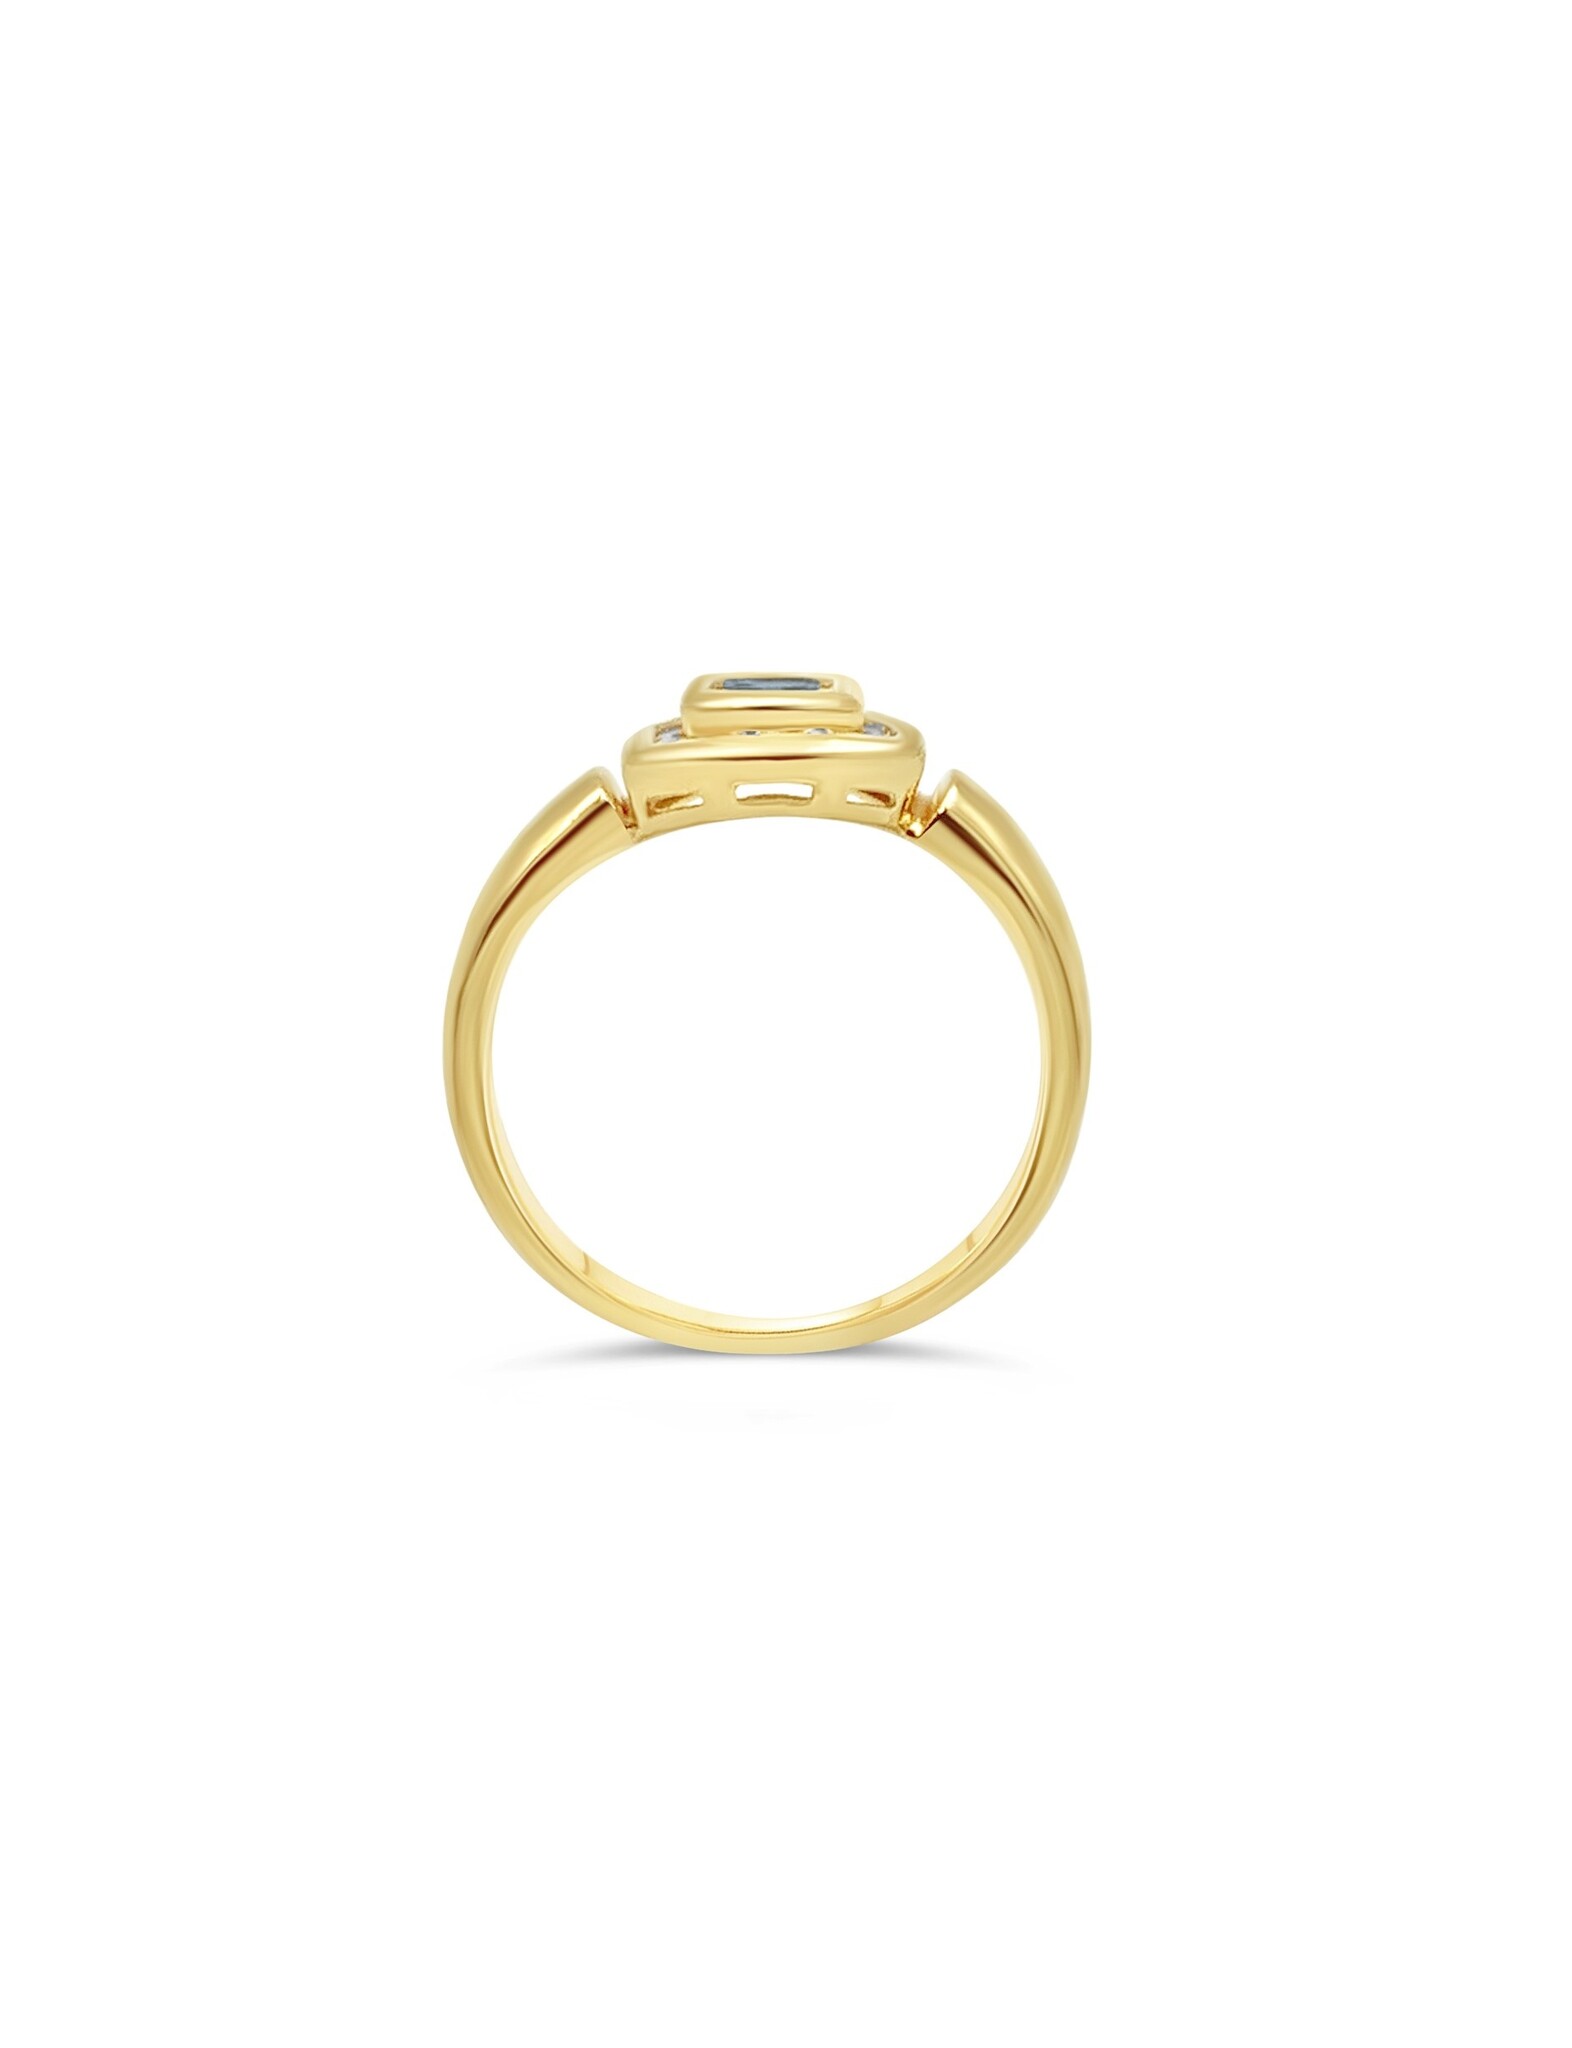 18k yellow gold ring with 0,50ct sapphire & 0,27 diamonds